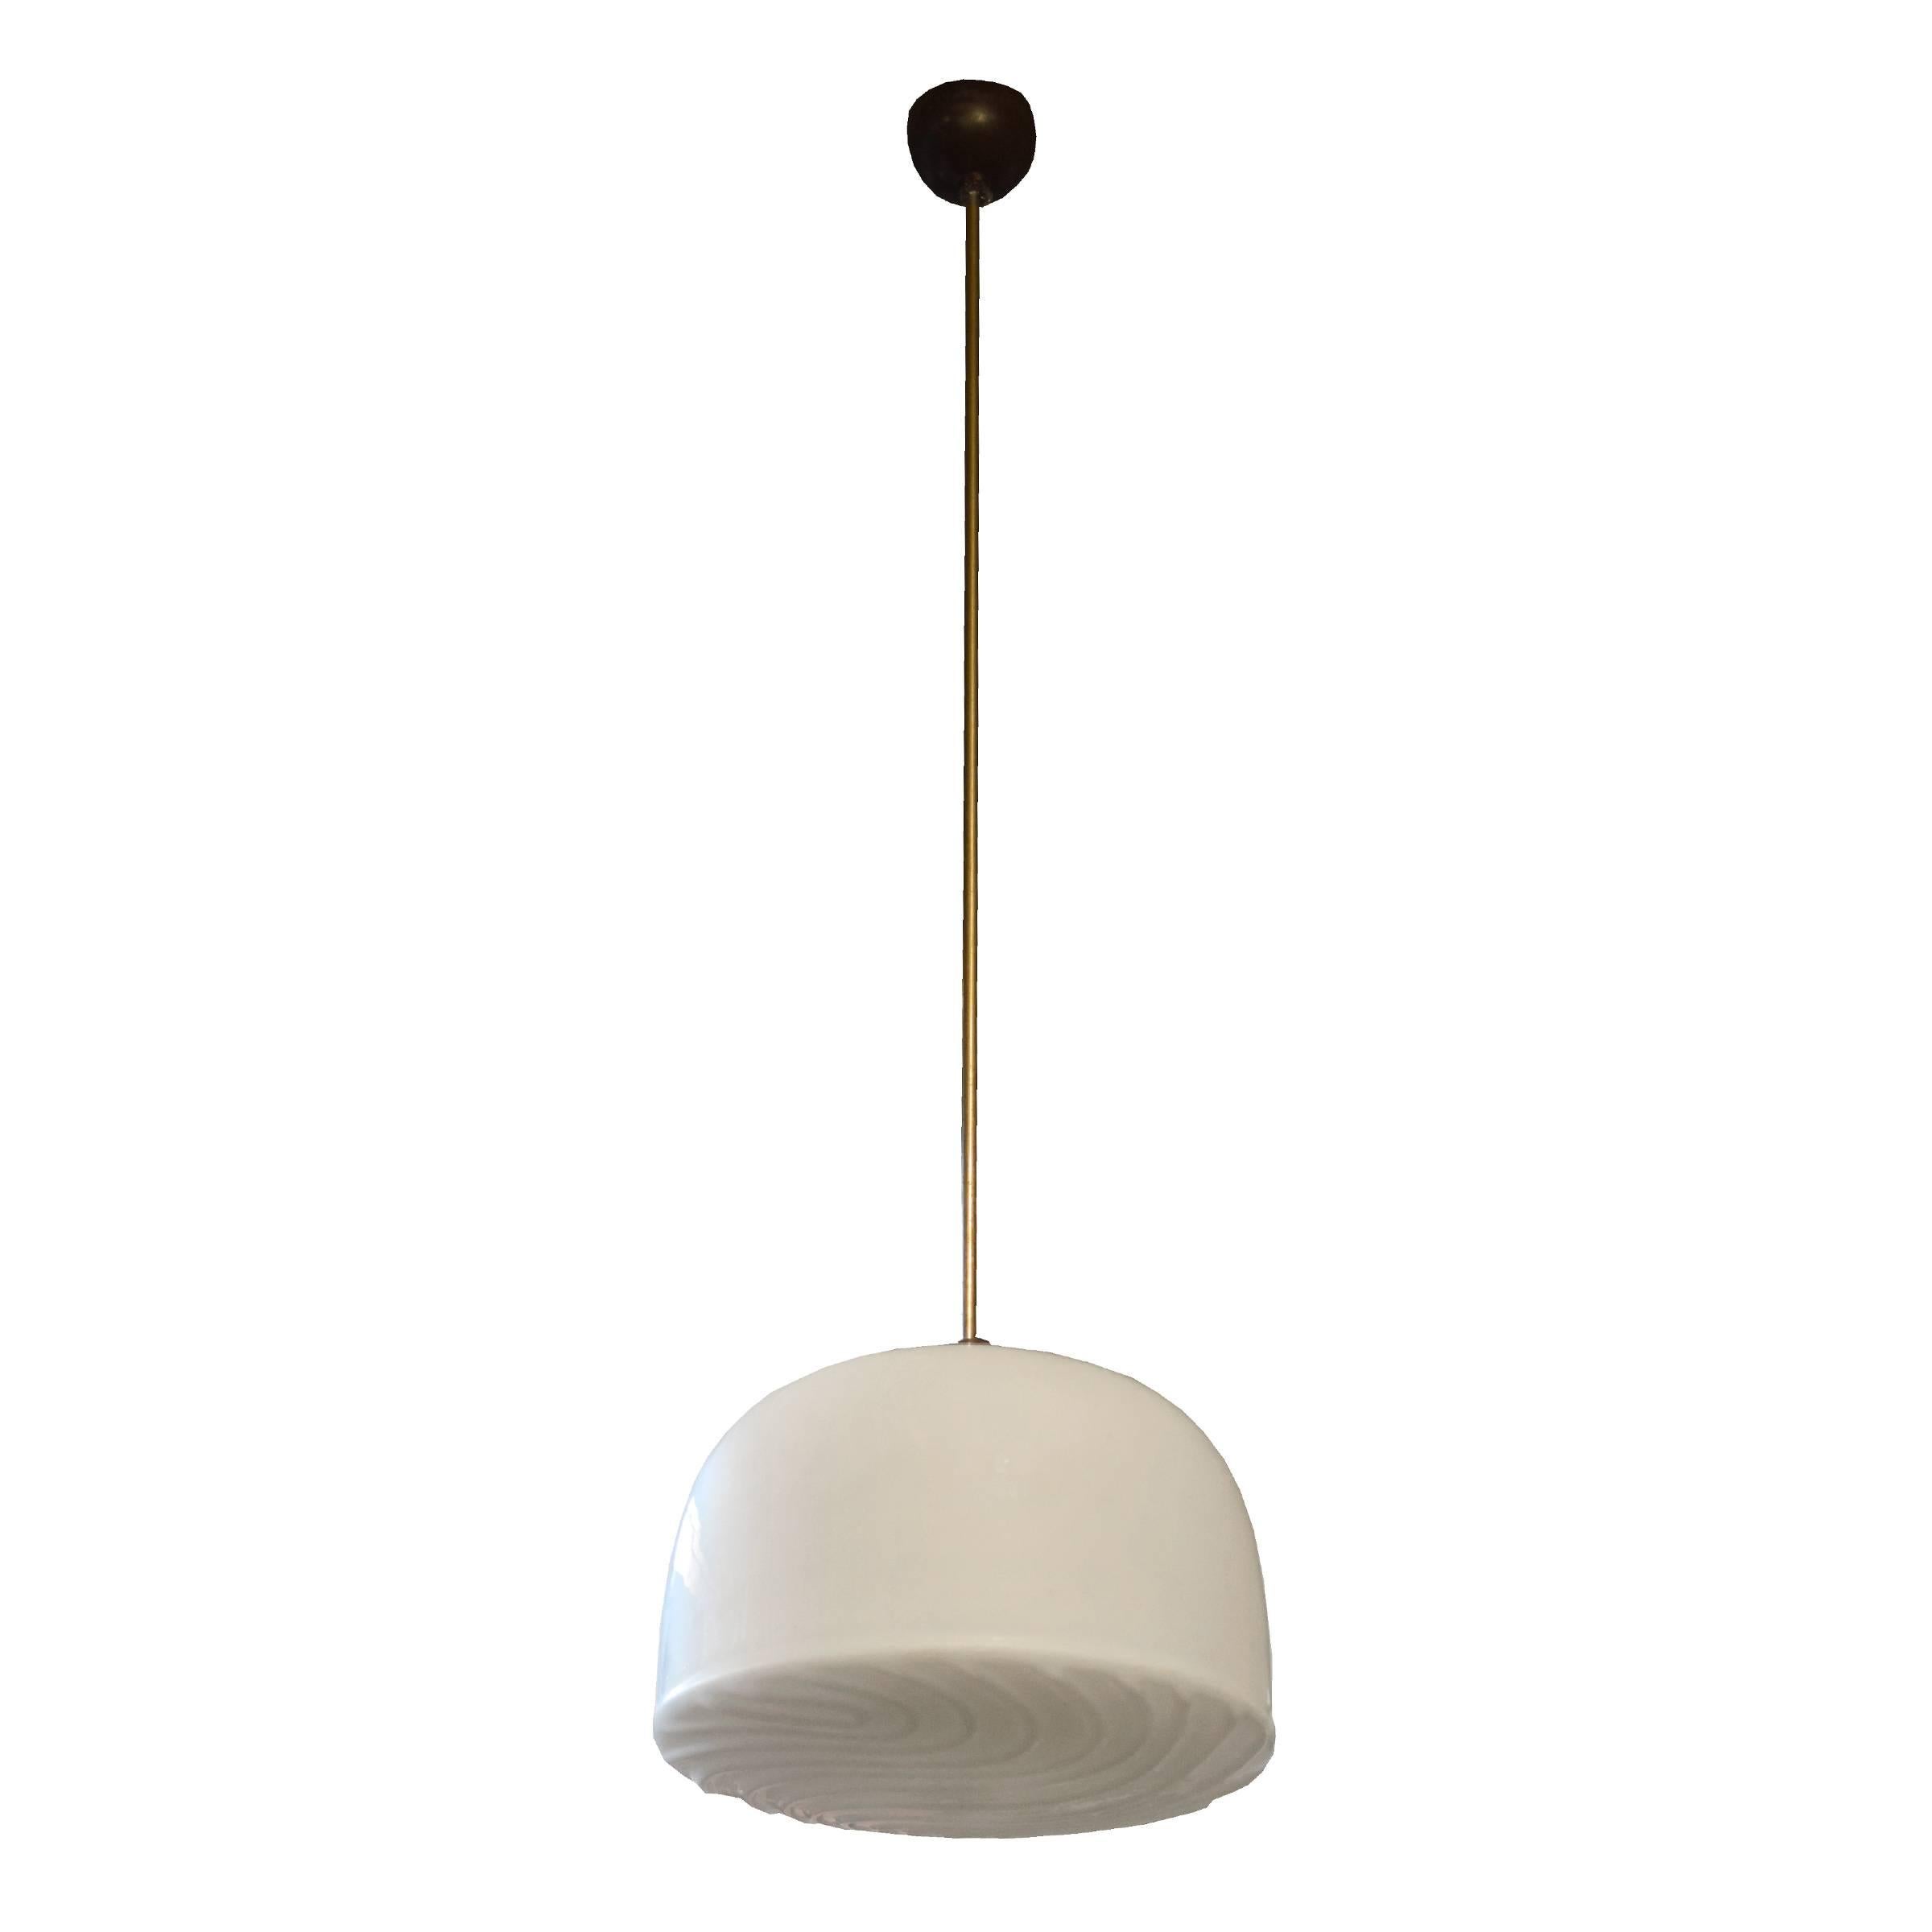 A Czech republic Mid-Century pendant light fixture with an opaque glass shade with a raised design. Four available.